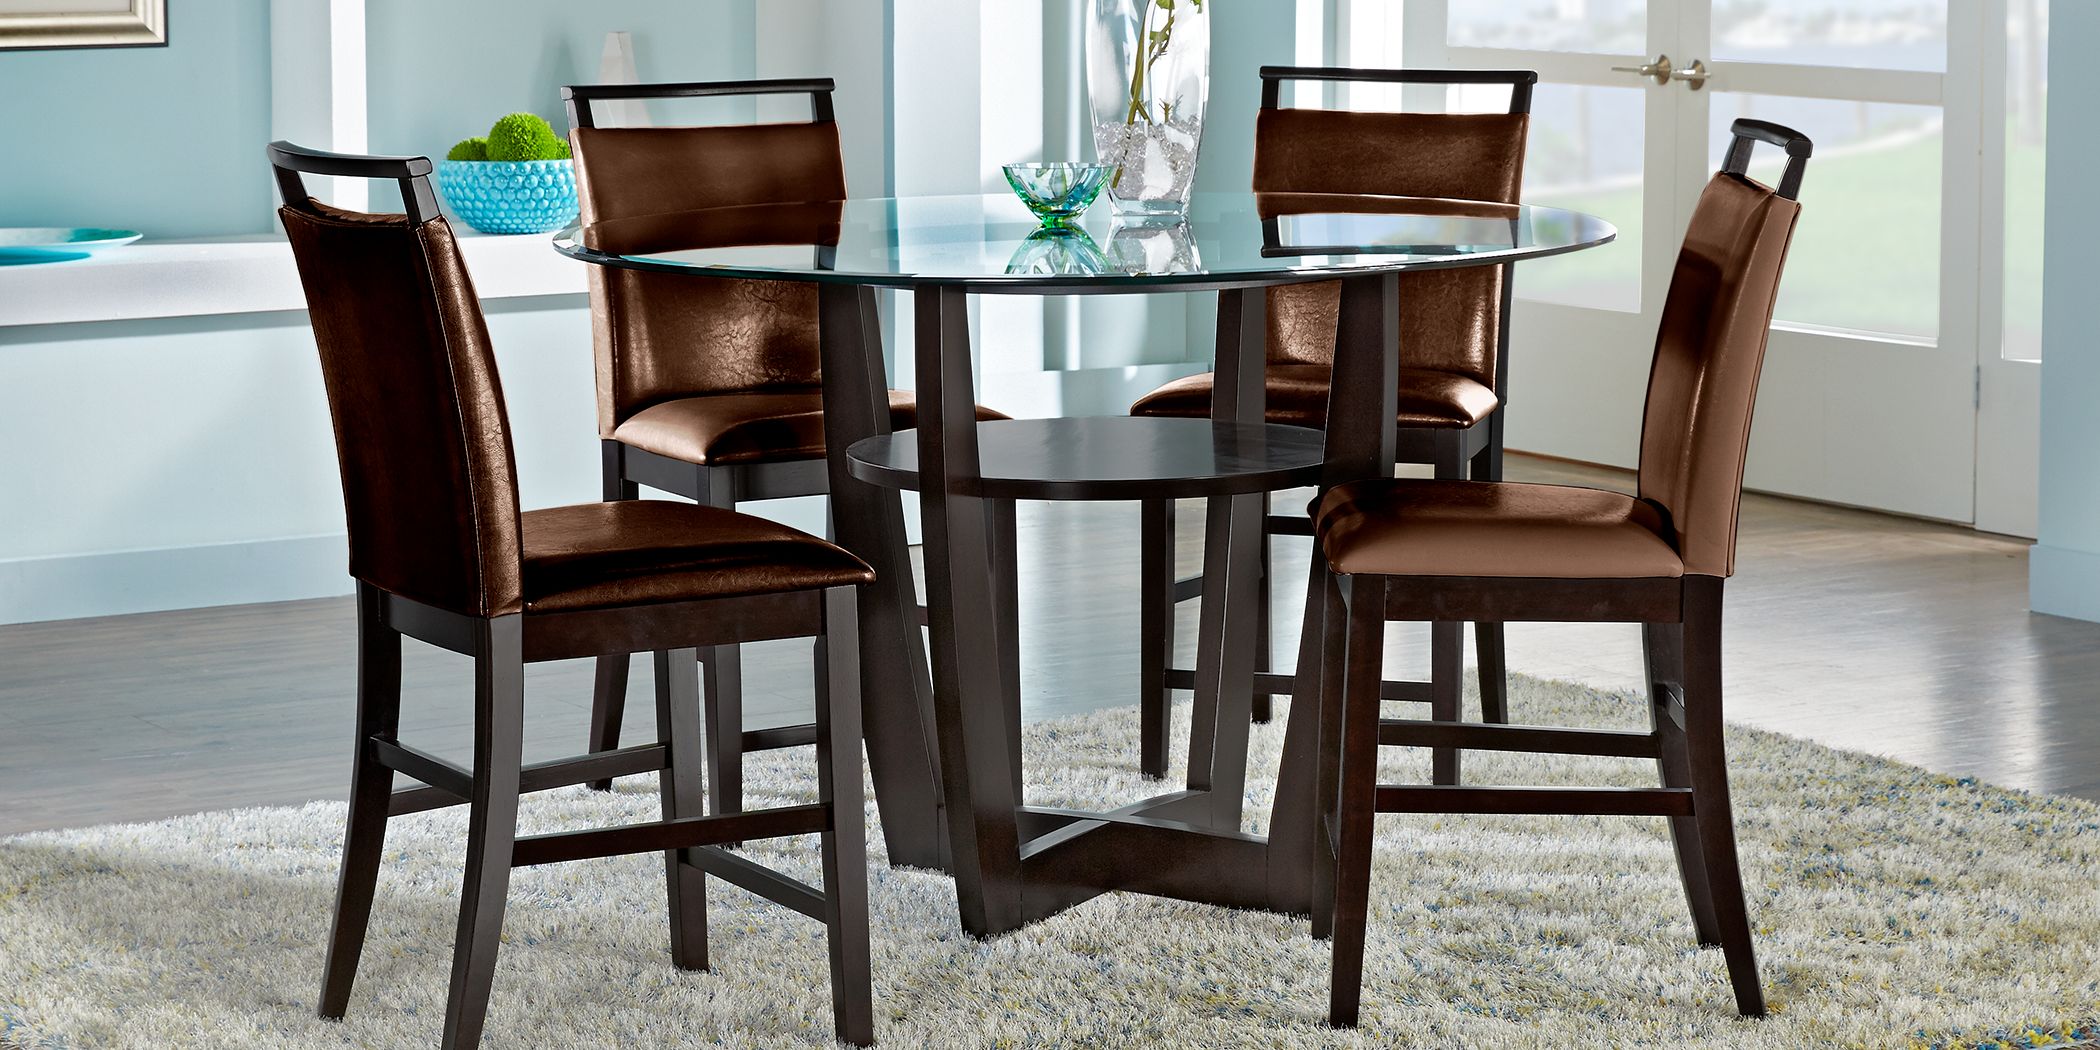 Glass Dining Table Sets, Glass Top Kitchen Table And Chair Sets